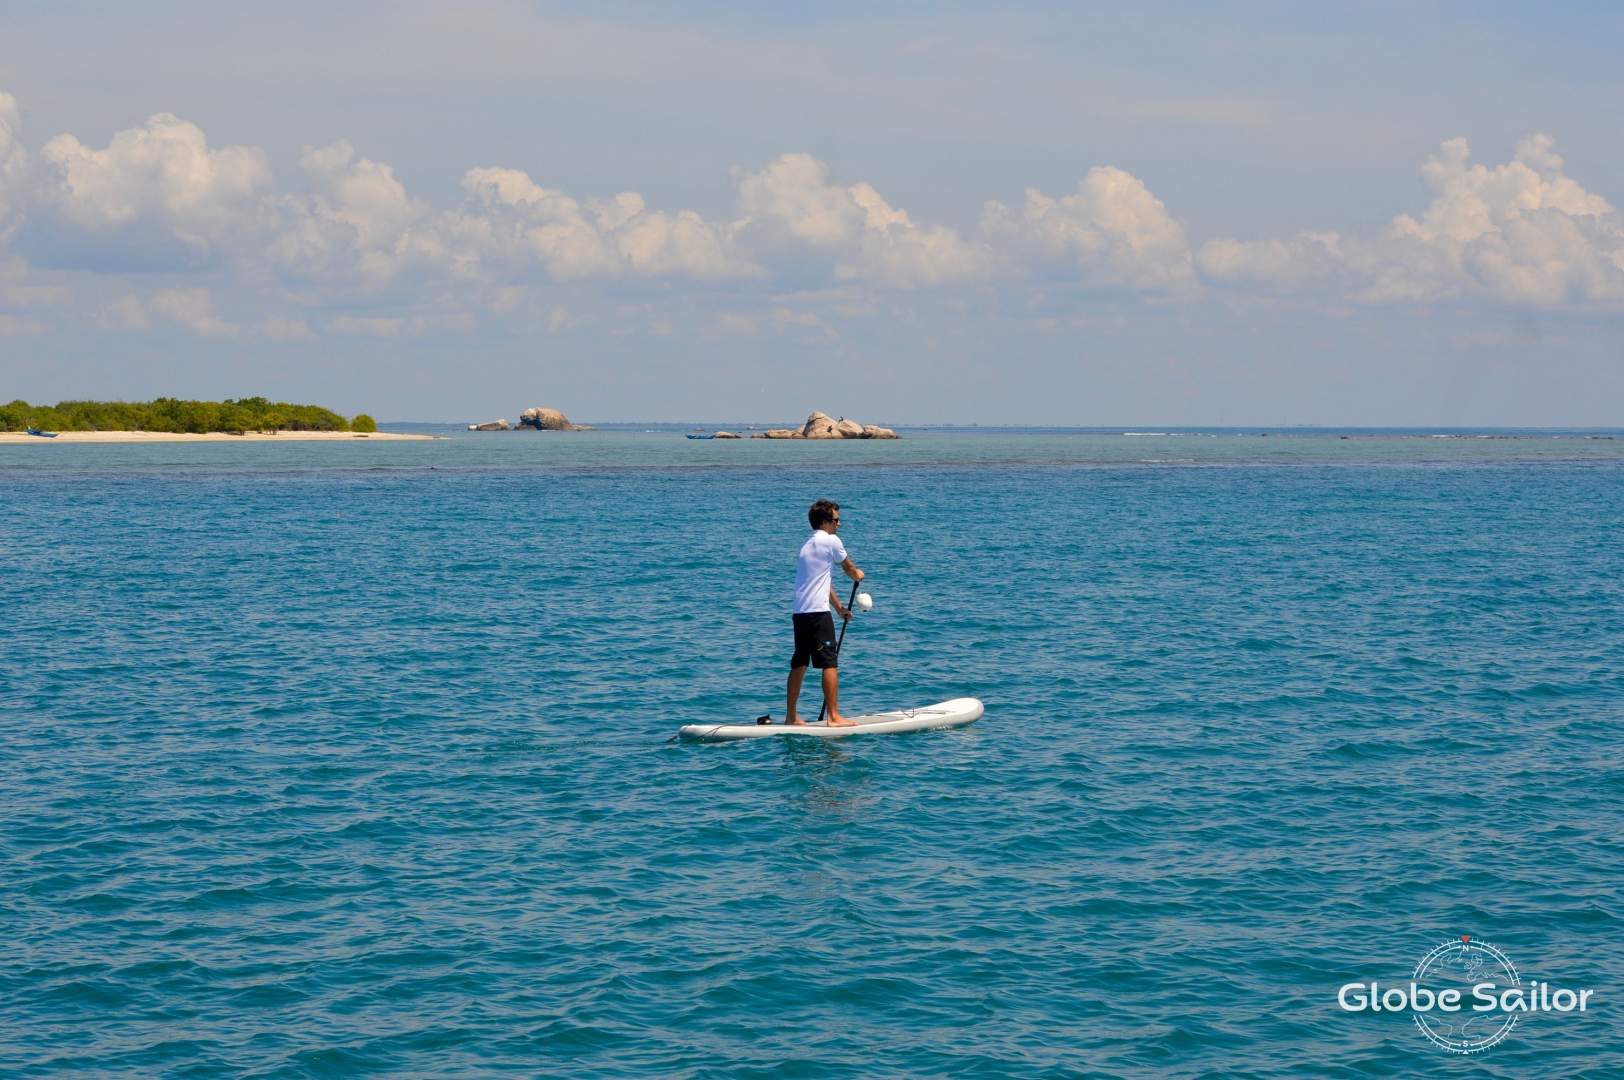 Take advantage of the paddleboards, balance is required!